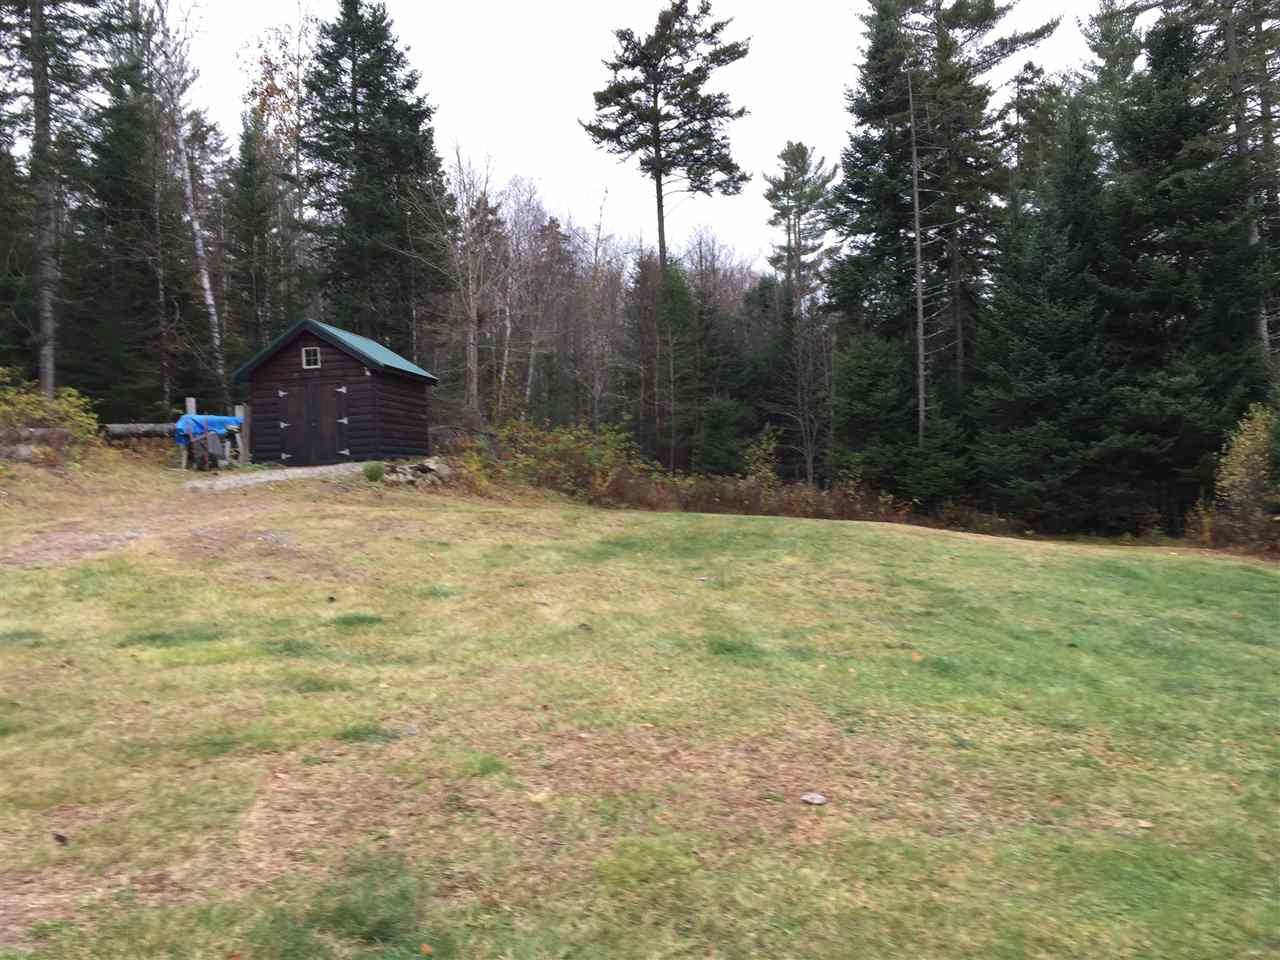 Site for 2 more cabins